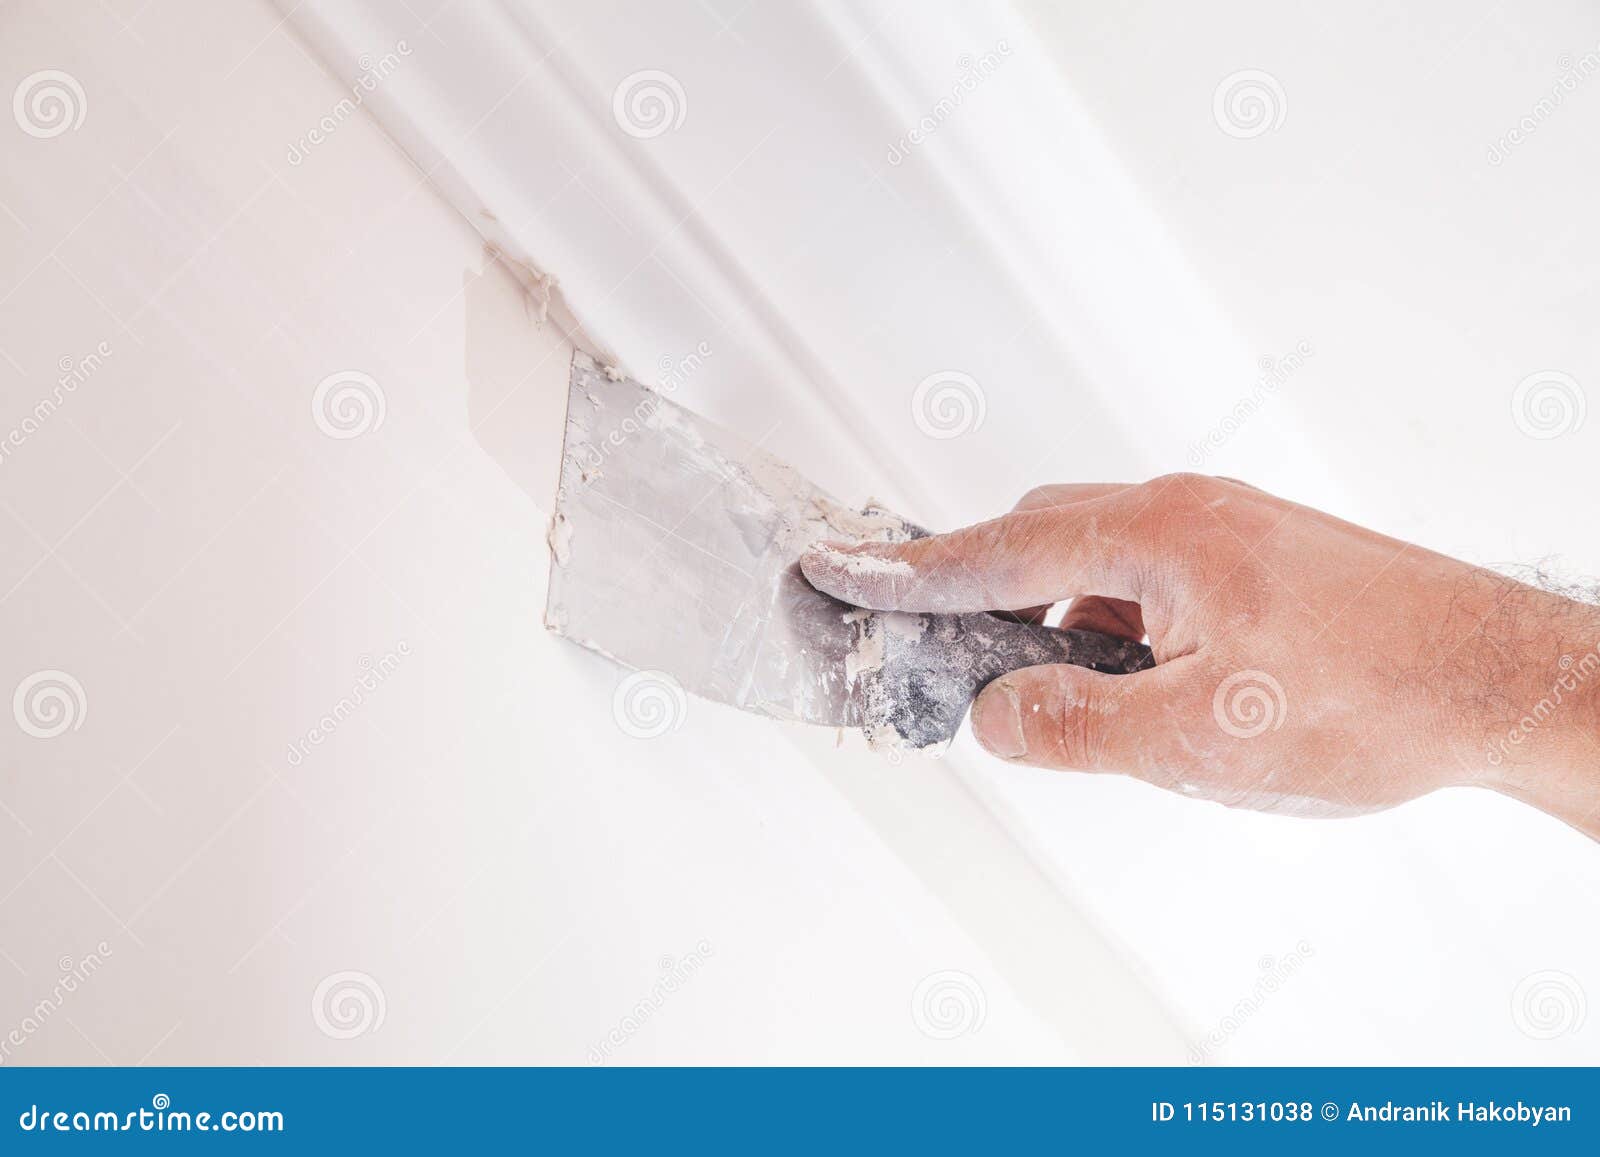 plastering wall with spatula.